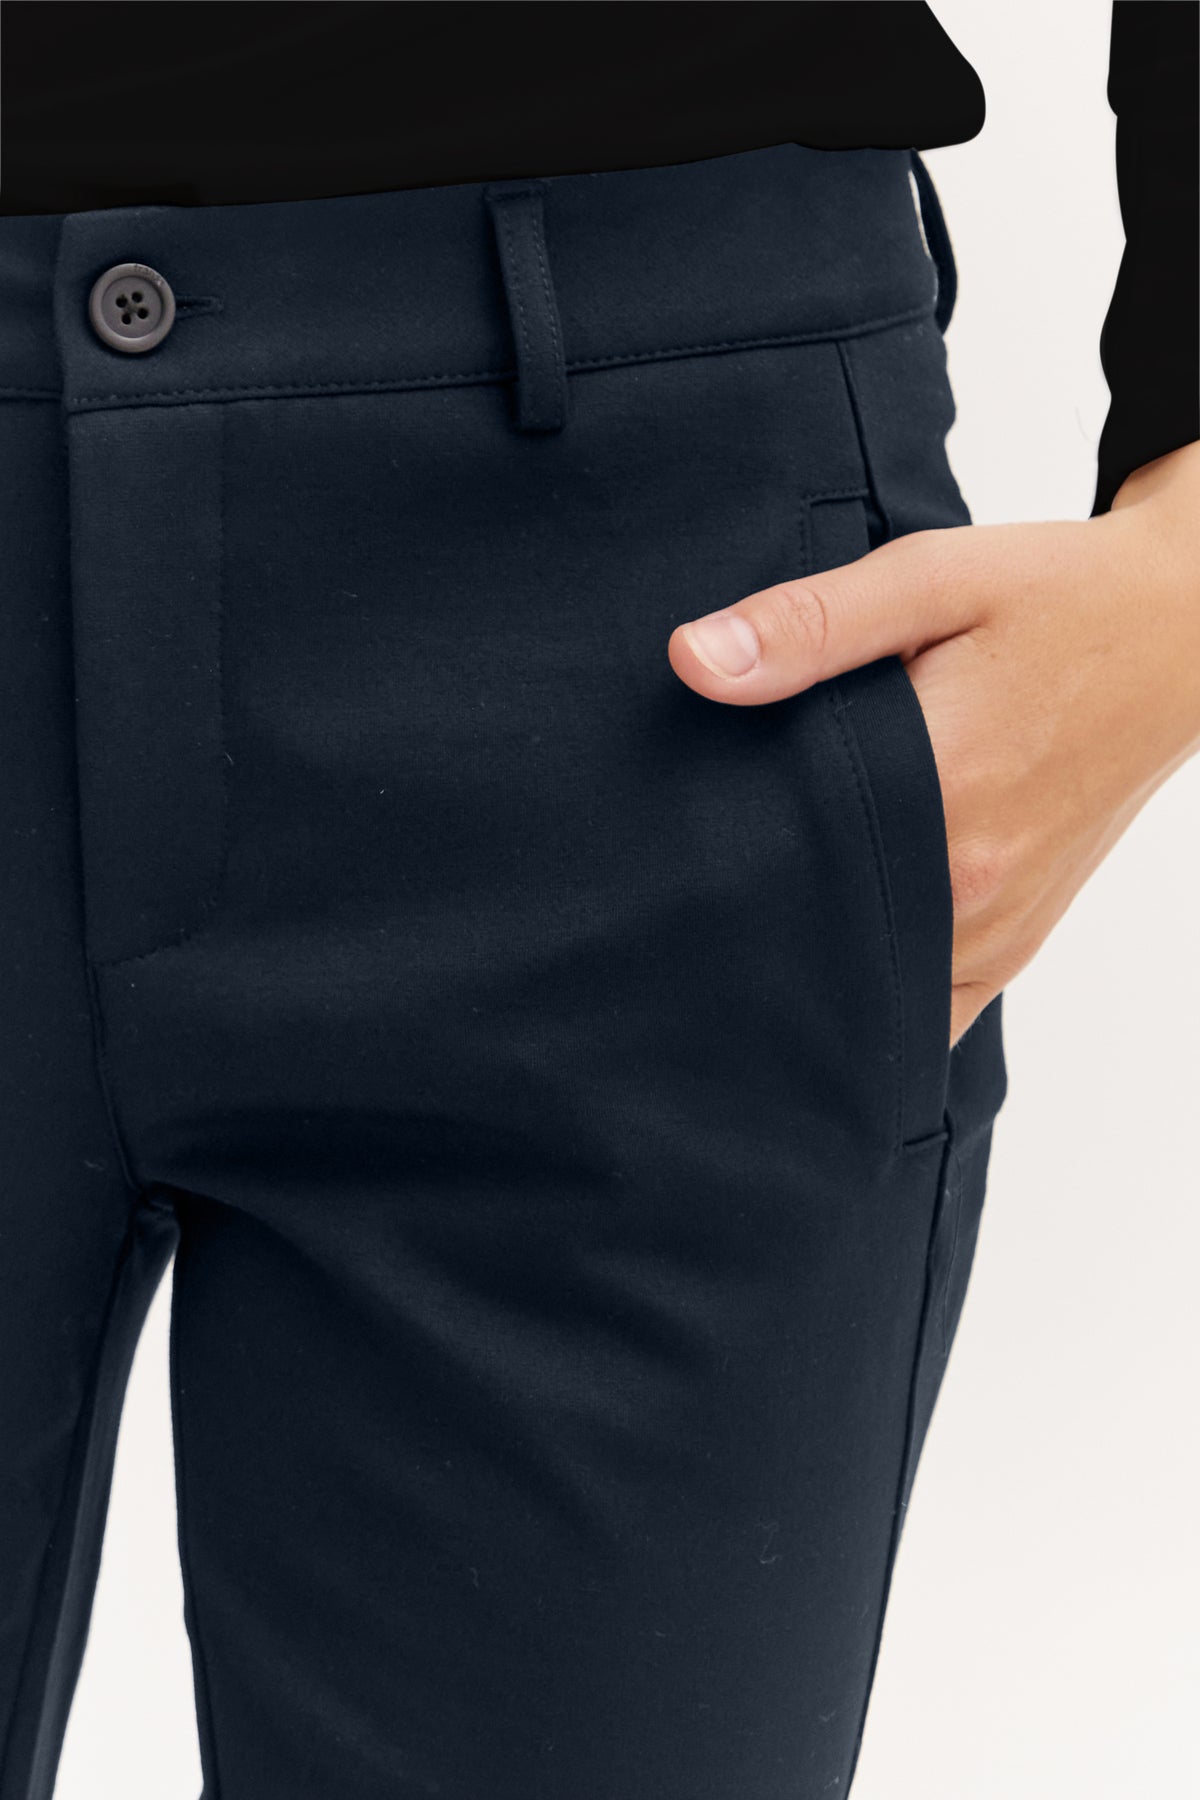 The Naomi Trouser in Navy